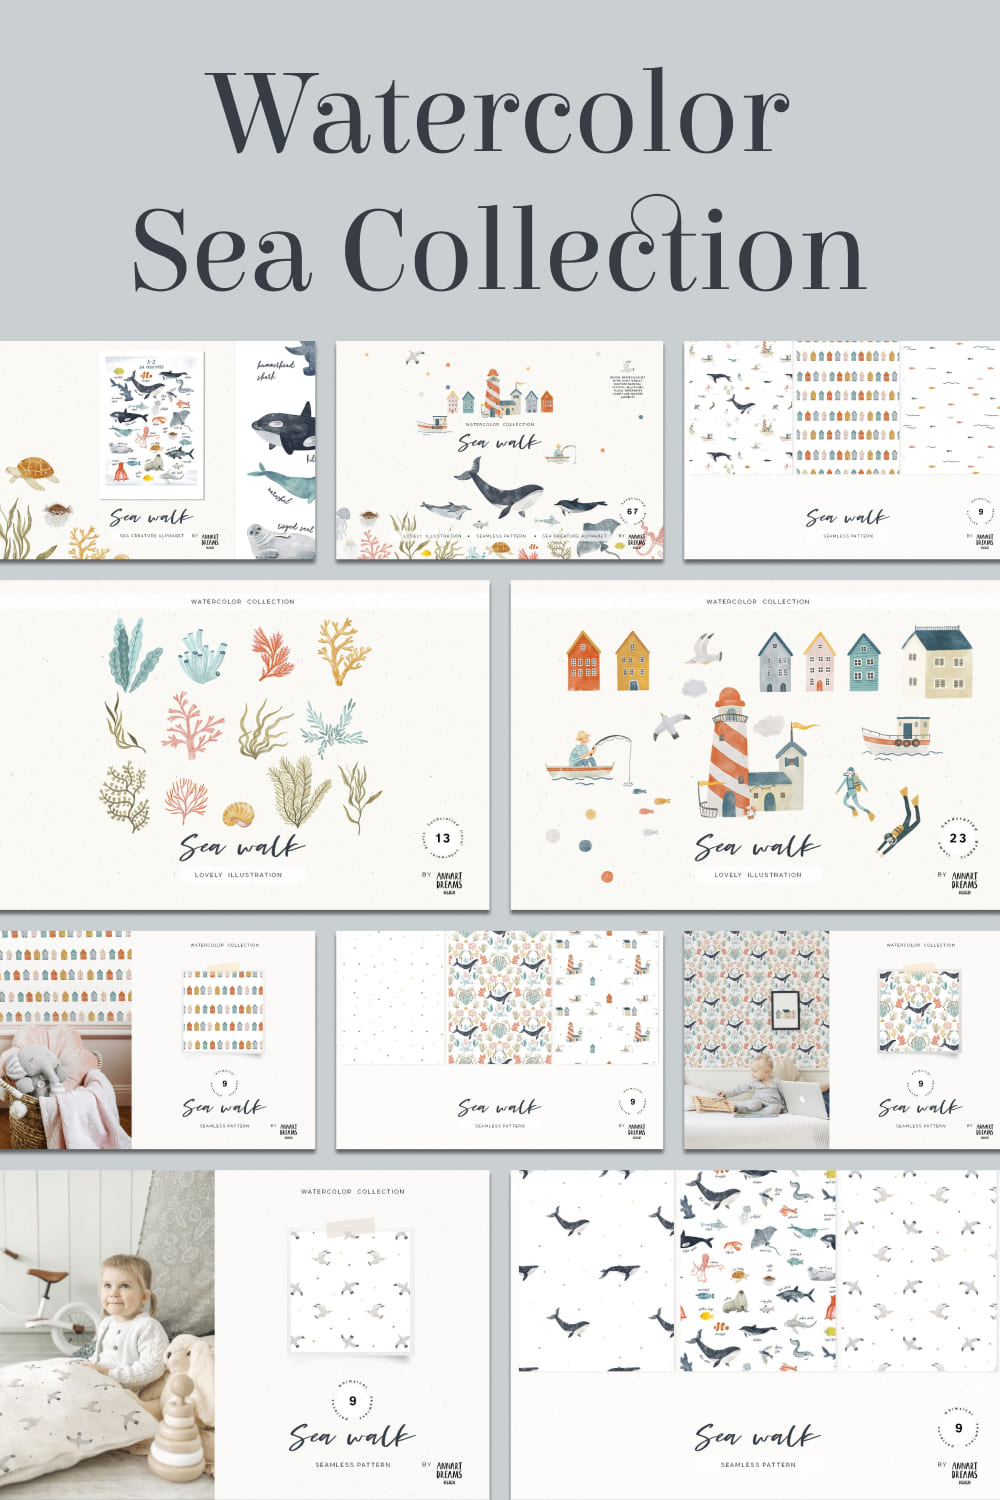 Watercolor Sea Graphics Collection pinterest image.